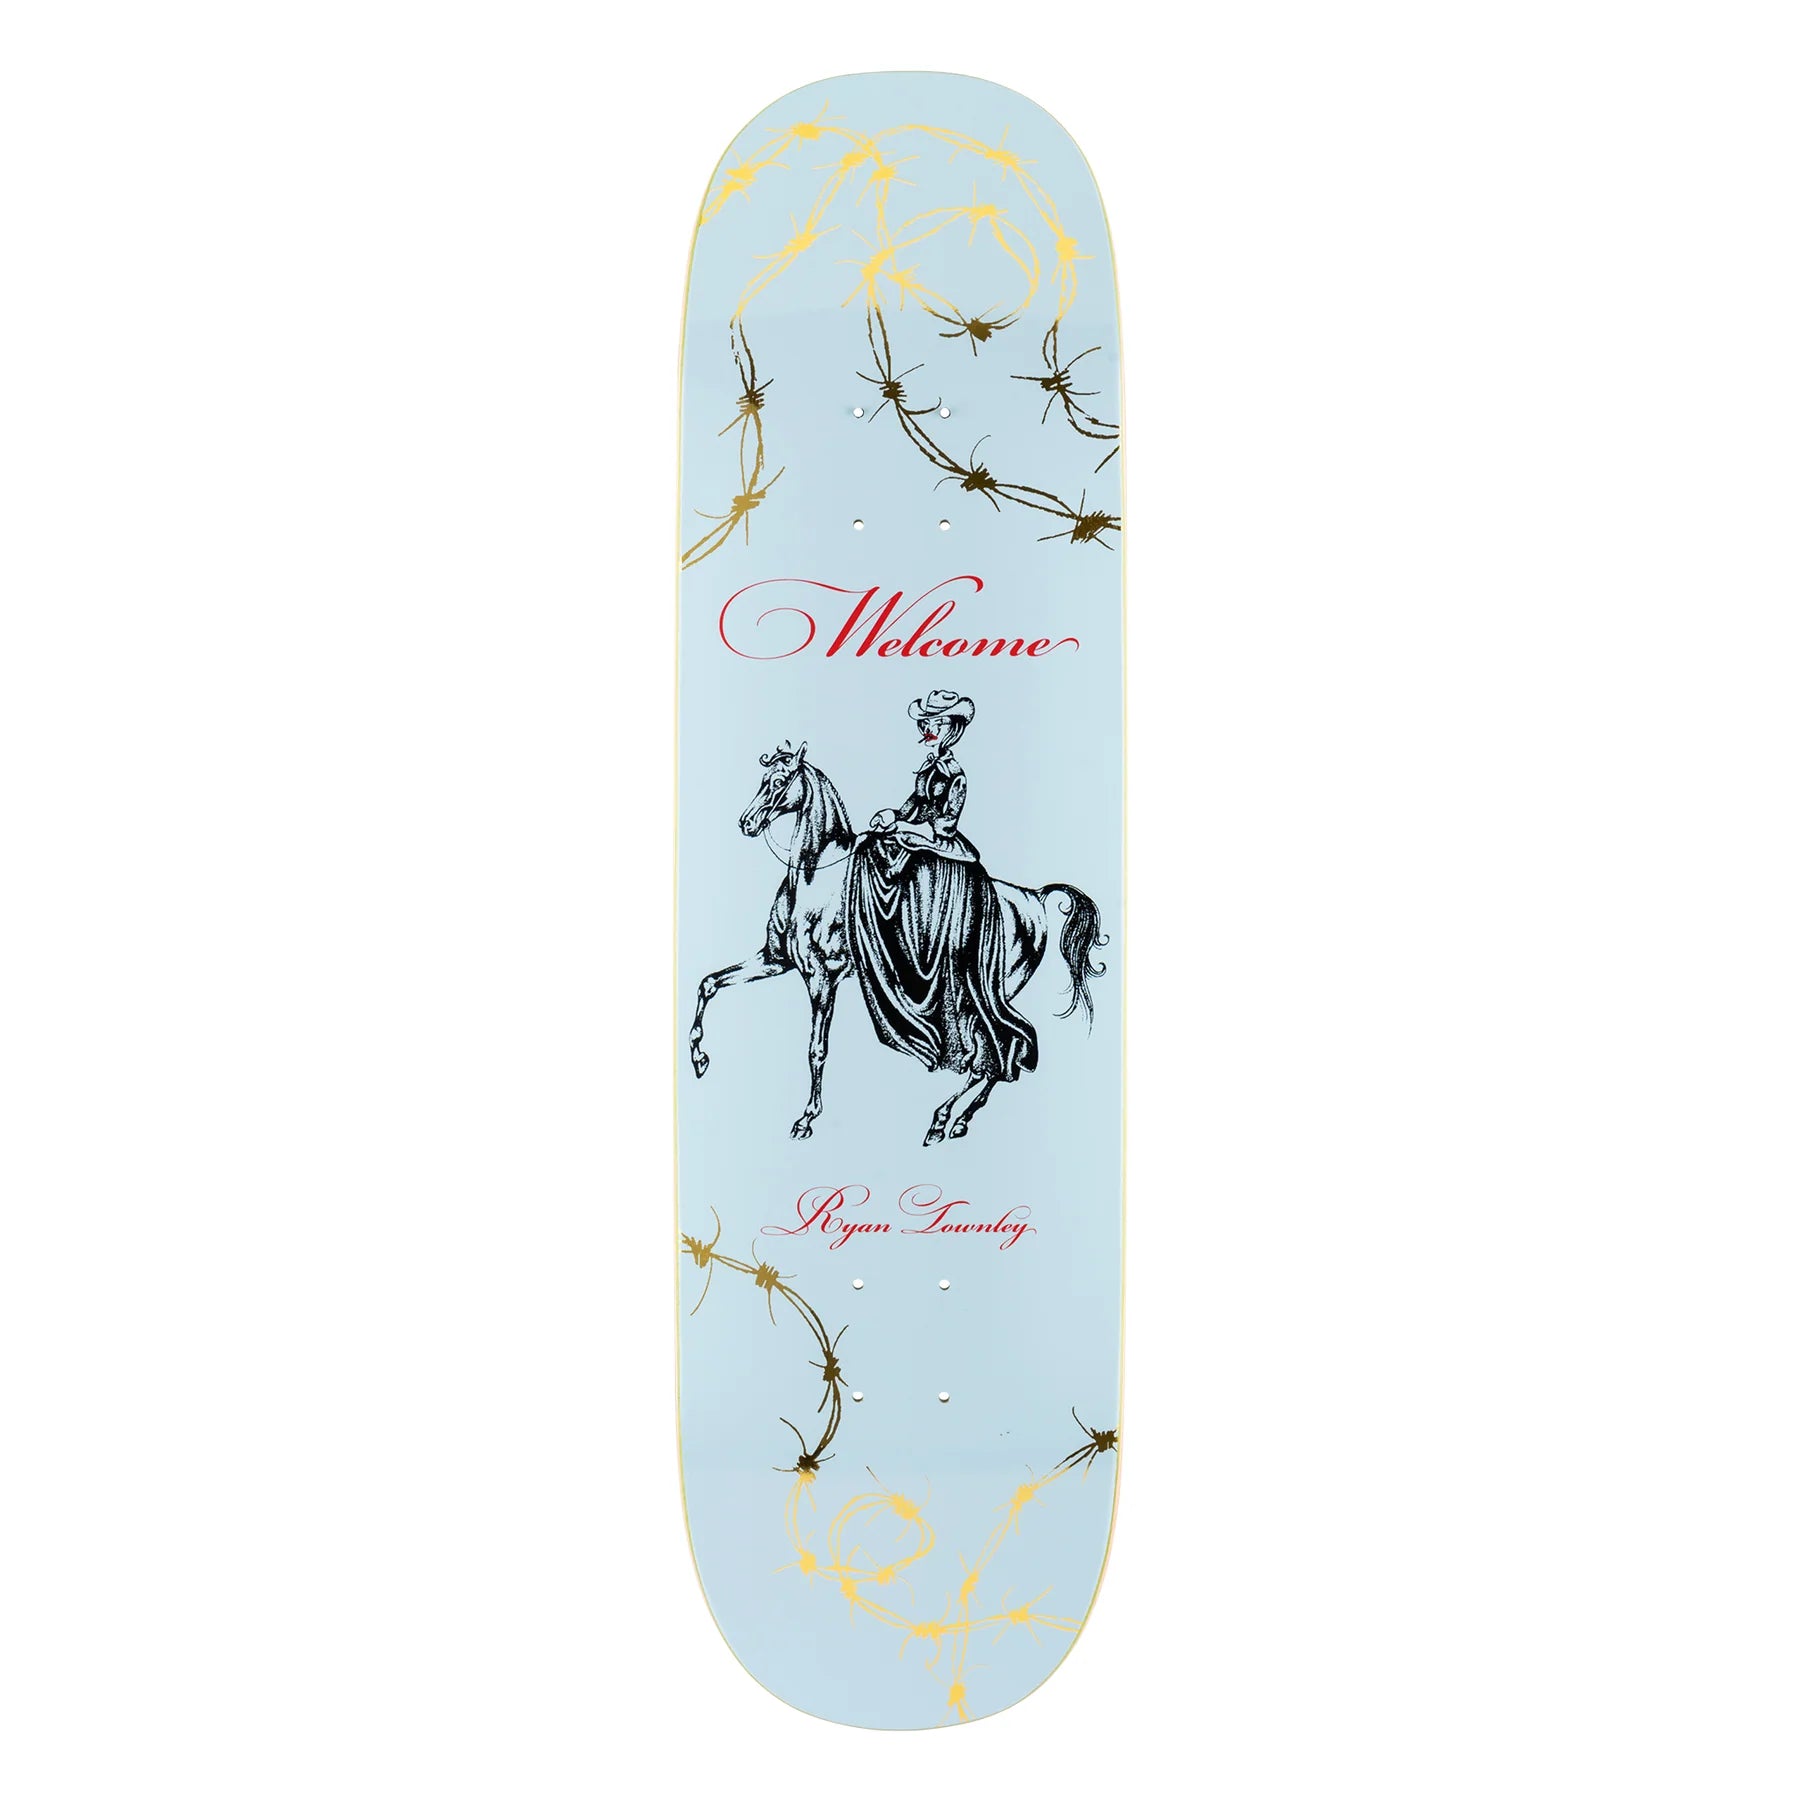 WELCOME RYAN TOWNLEY COWGIRL ON ENENRA - LIGHT BLUE/GOLD FOIL - 8.5&quot;